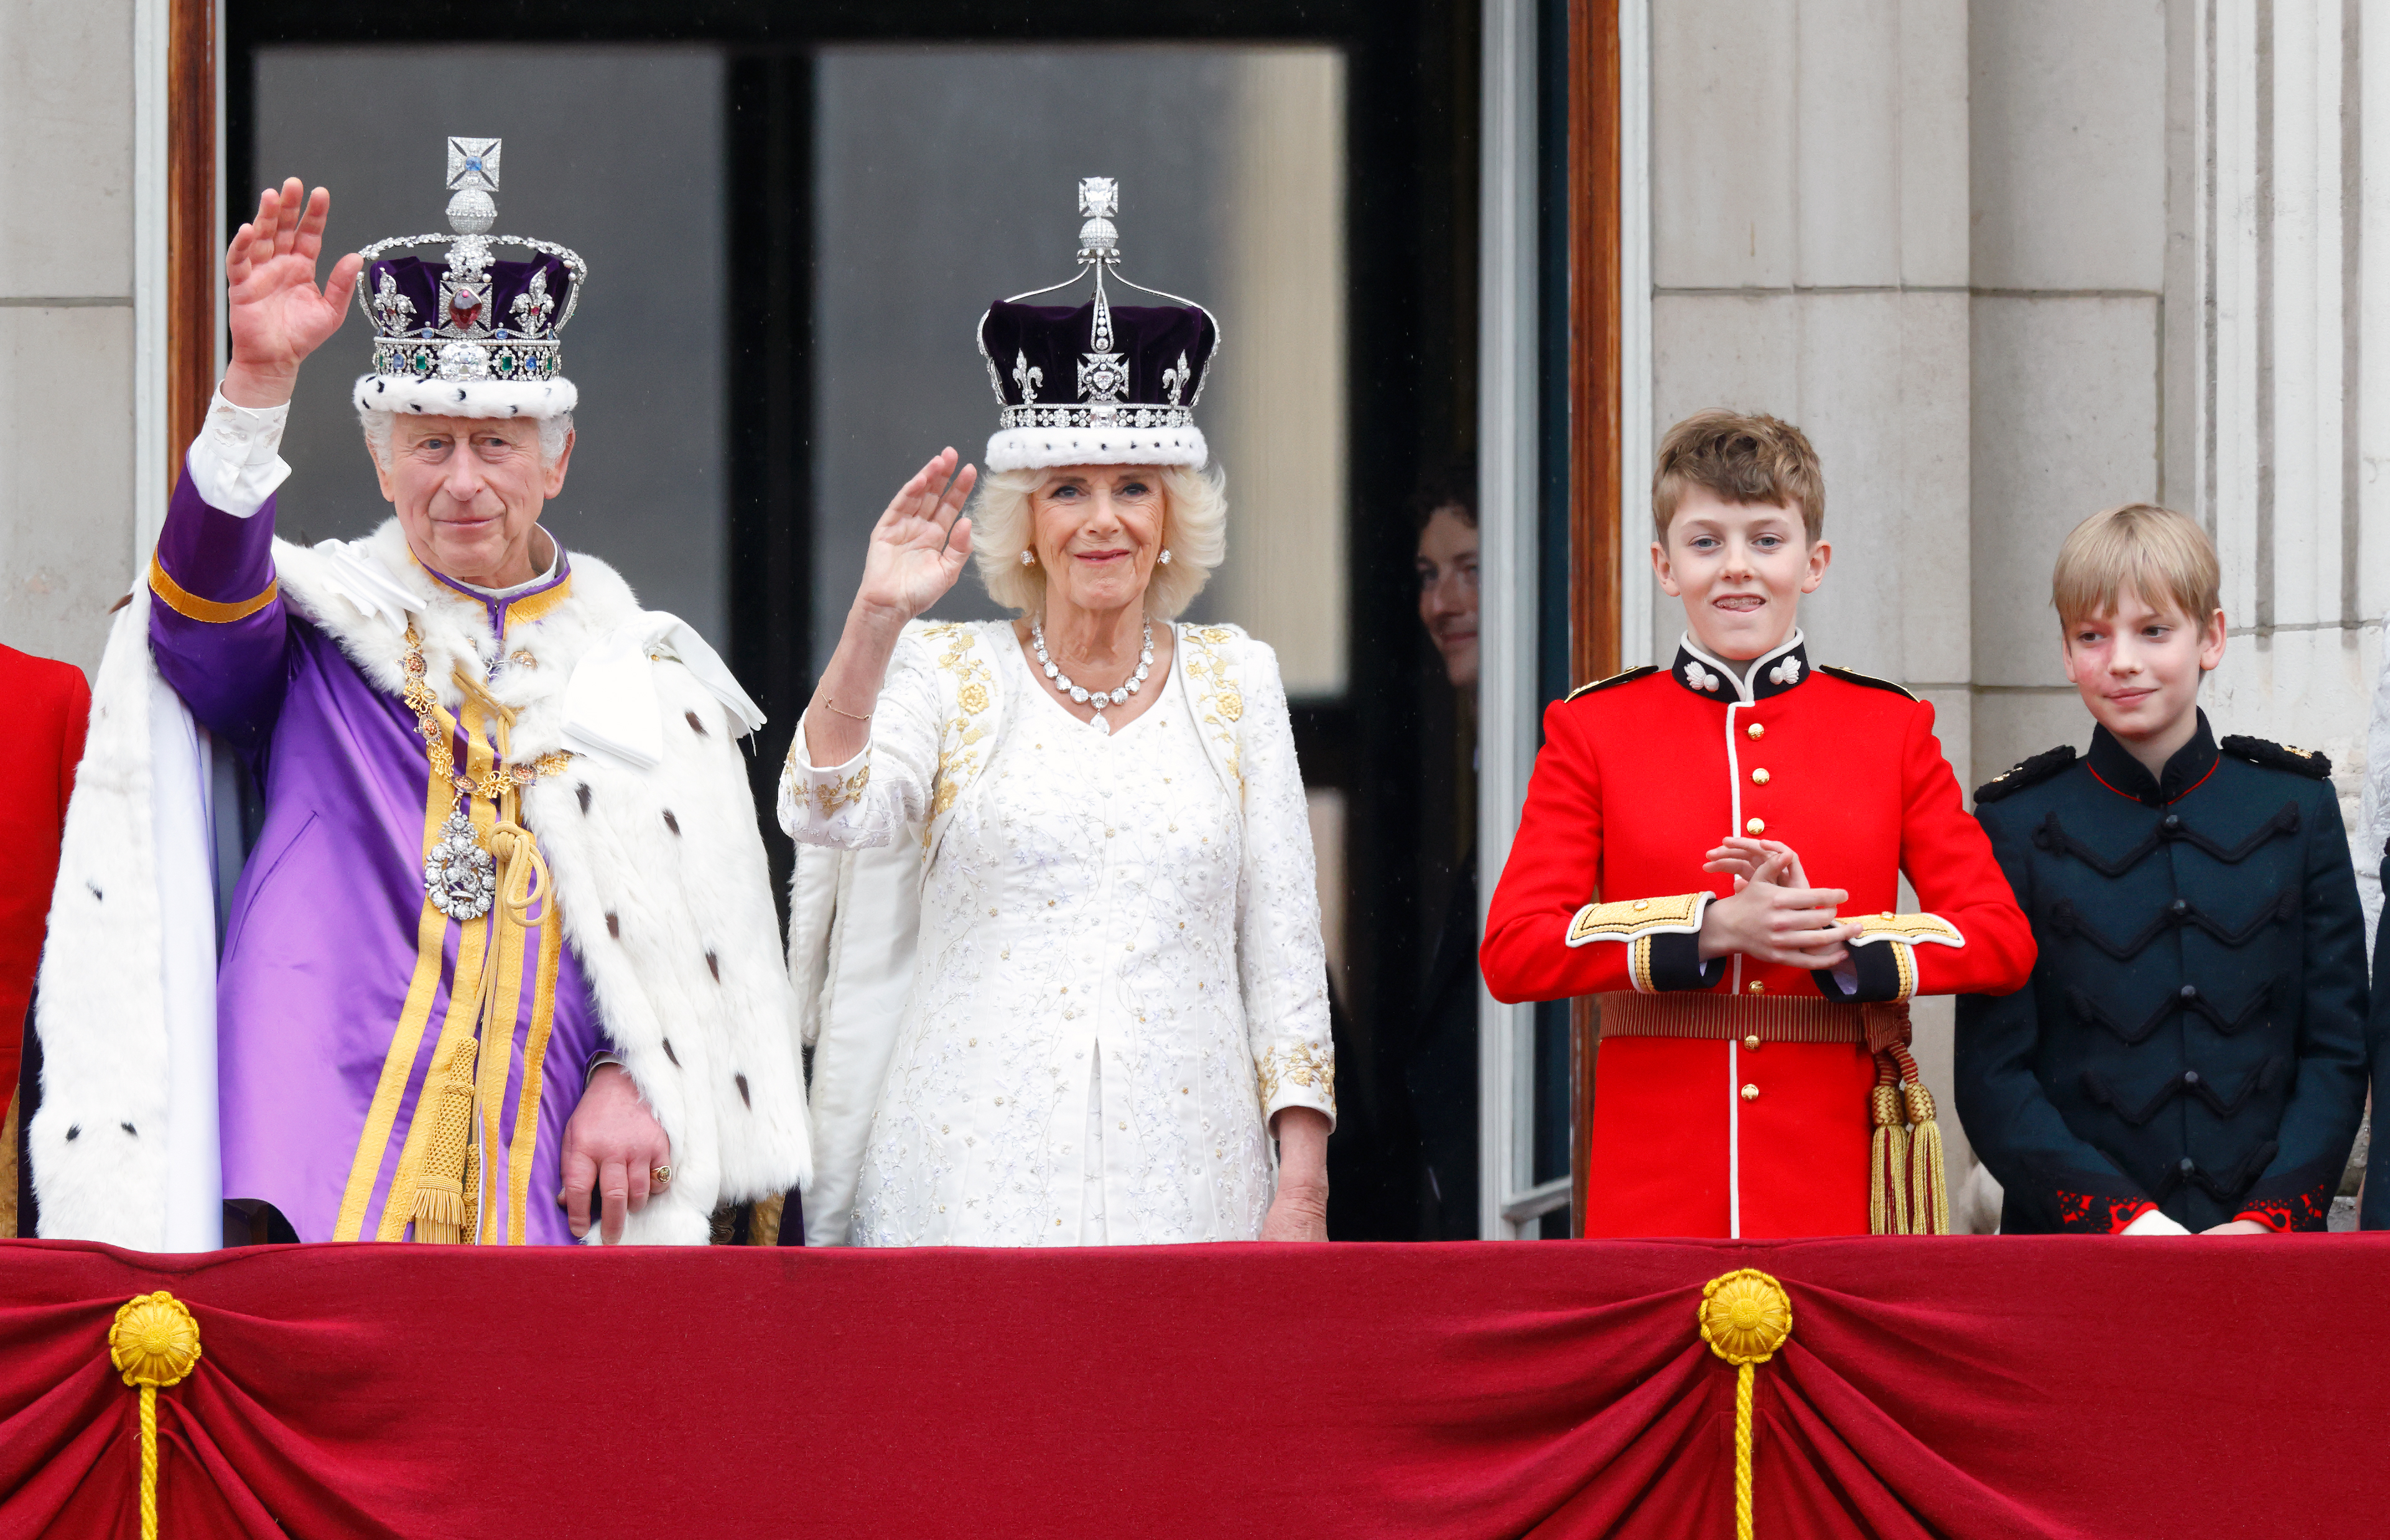 King Charles III, Queen Camilla, Freddy Parker Bowles, and Gus Lopes at the Buckingham Palace after the Coronation service in London, England, on May 6, 2023. | Source: Getty Images